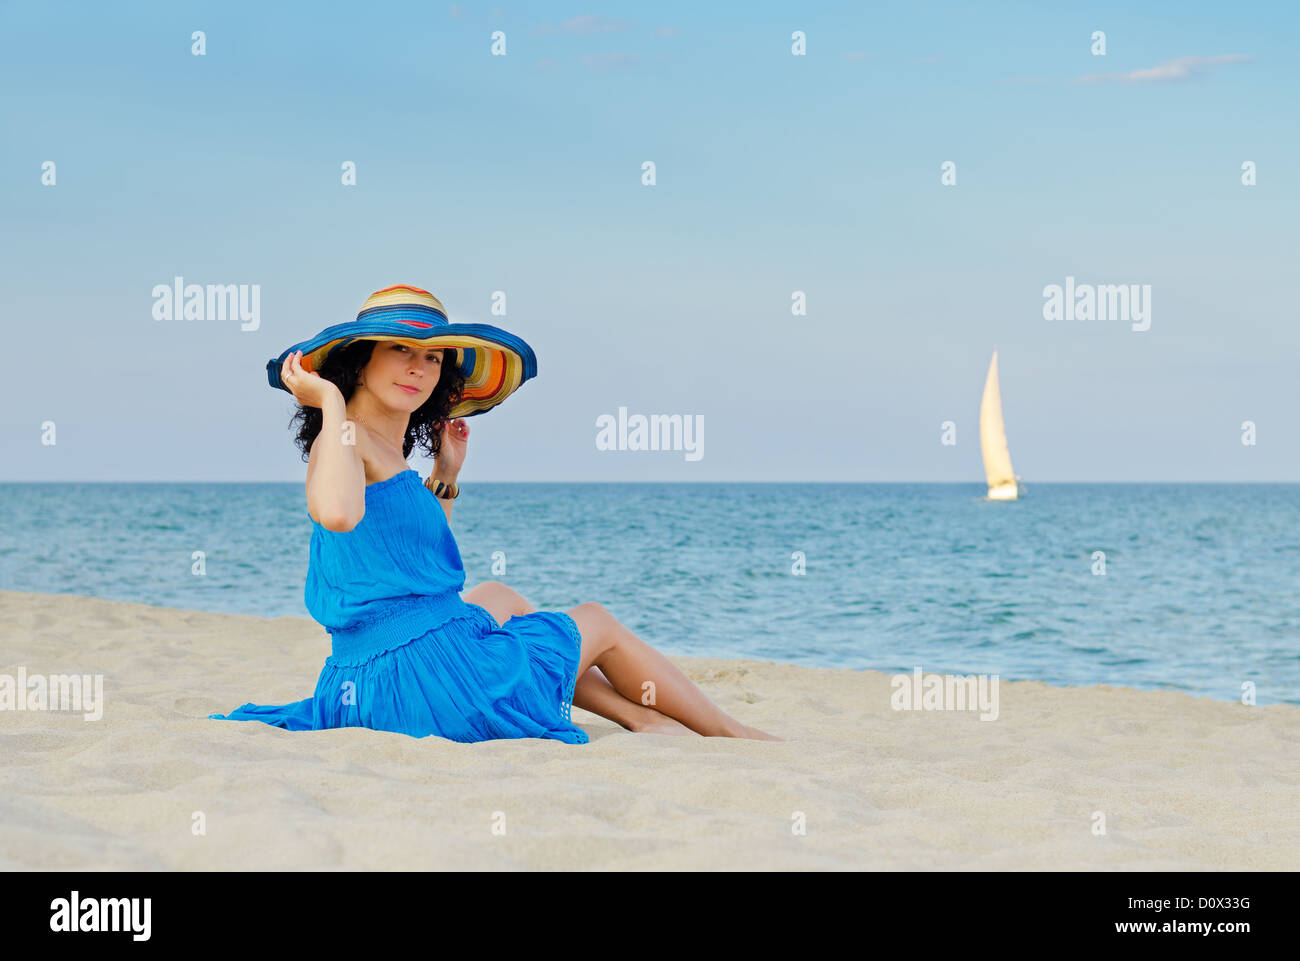 Attractive woman in blue dress sitting by the sea on beautiful sandy beach Stock Photo